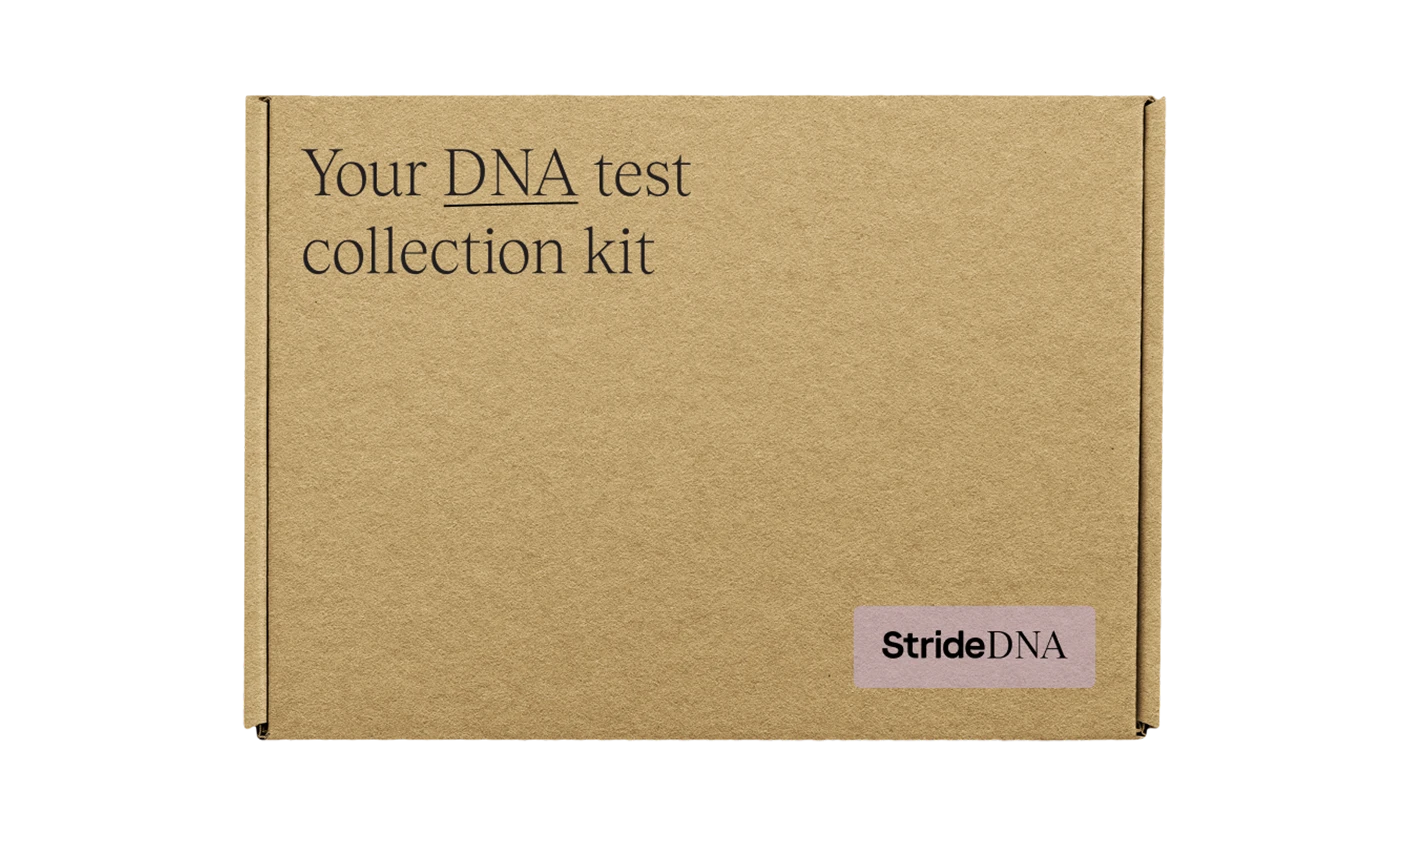 A simple at-home DNA test kit